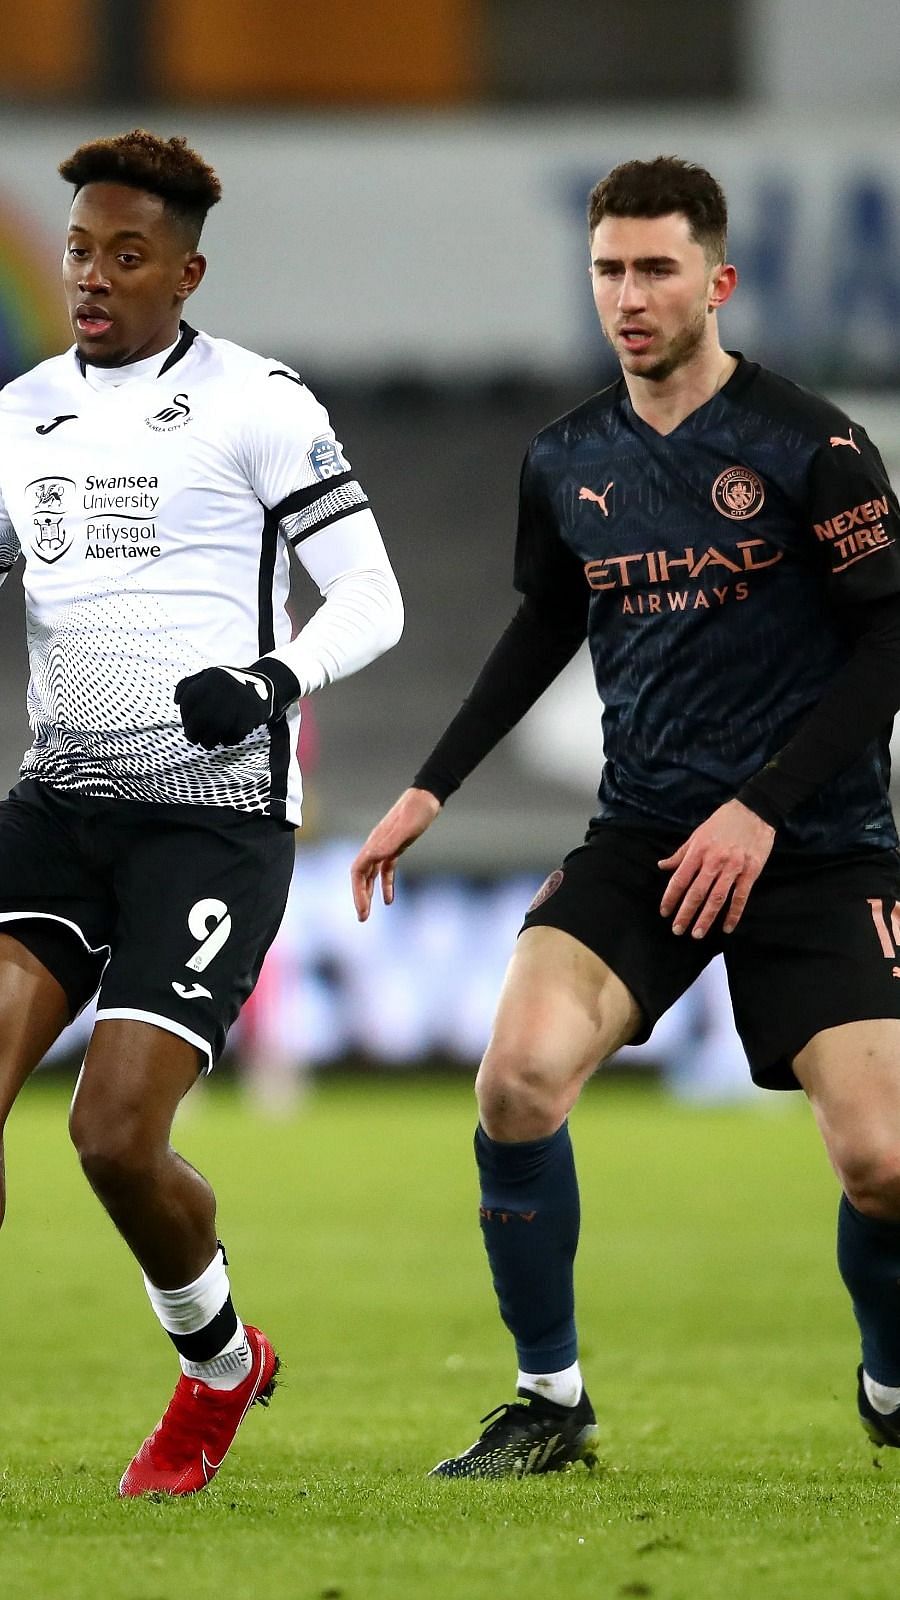 Swansea City Vs Manchester City Player Ratings As The Citizens Cruise Into The Quarter Finals Fa Cup 2020 21